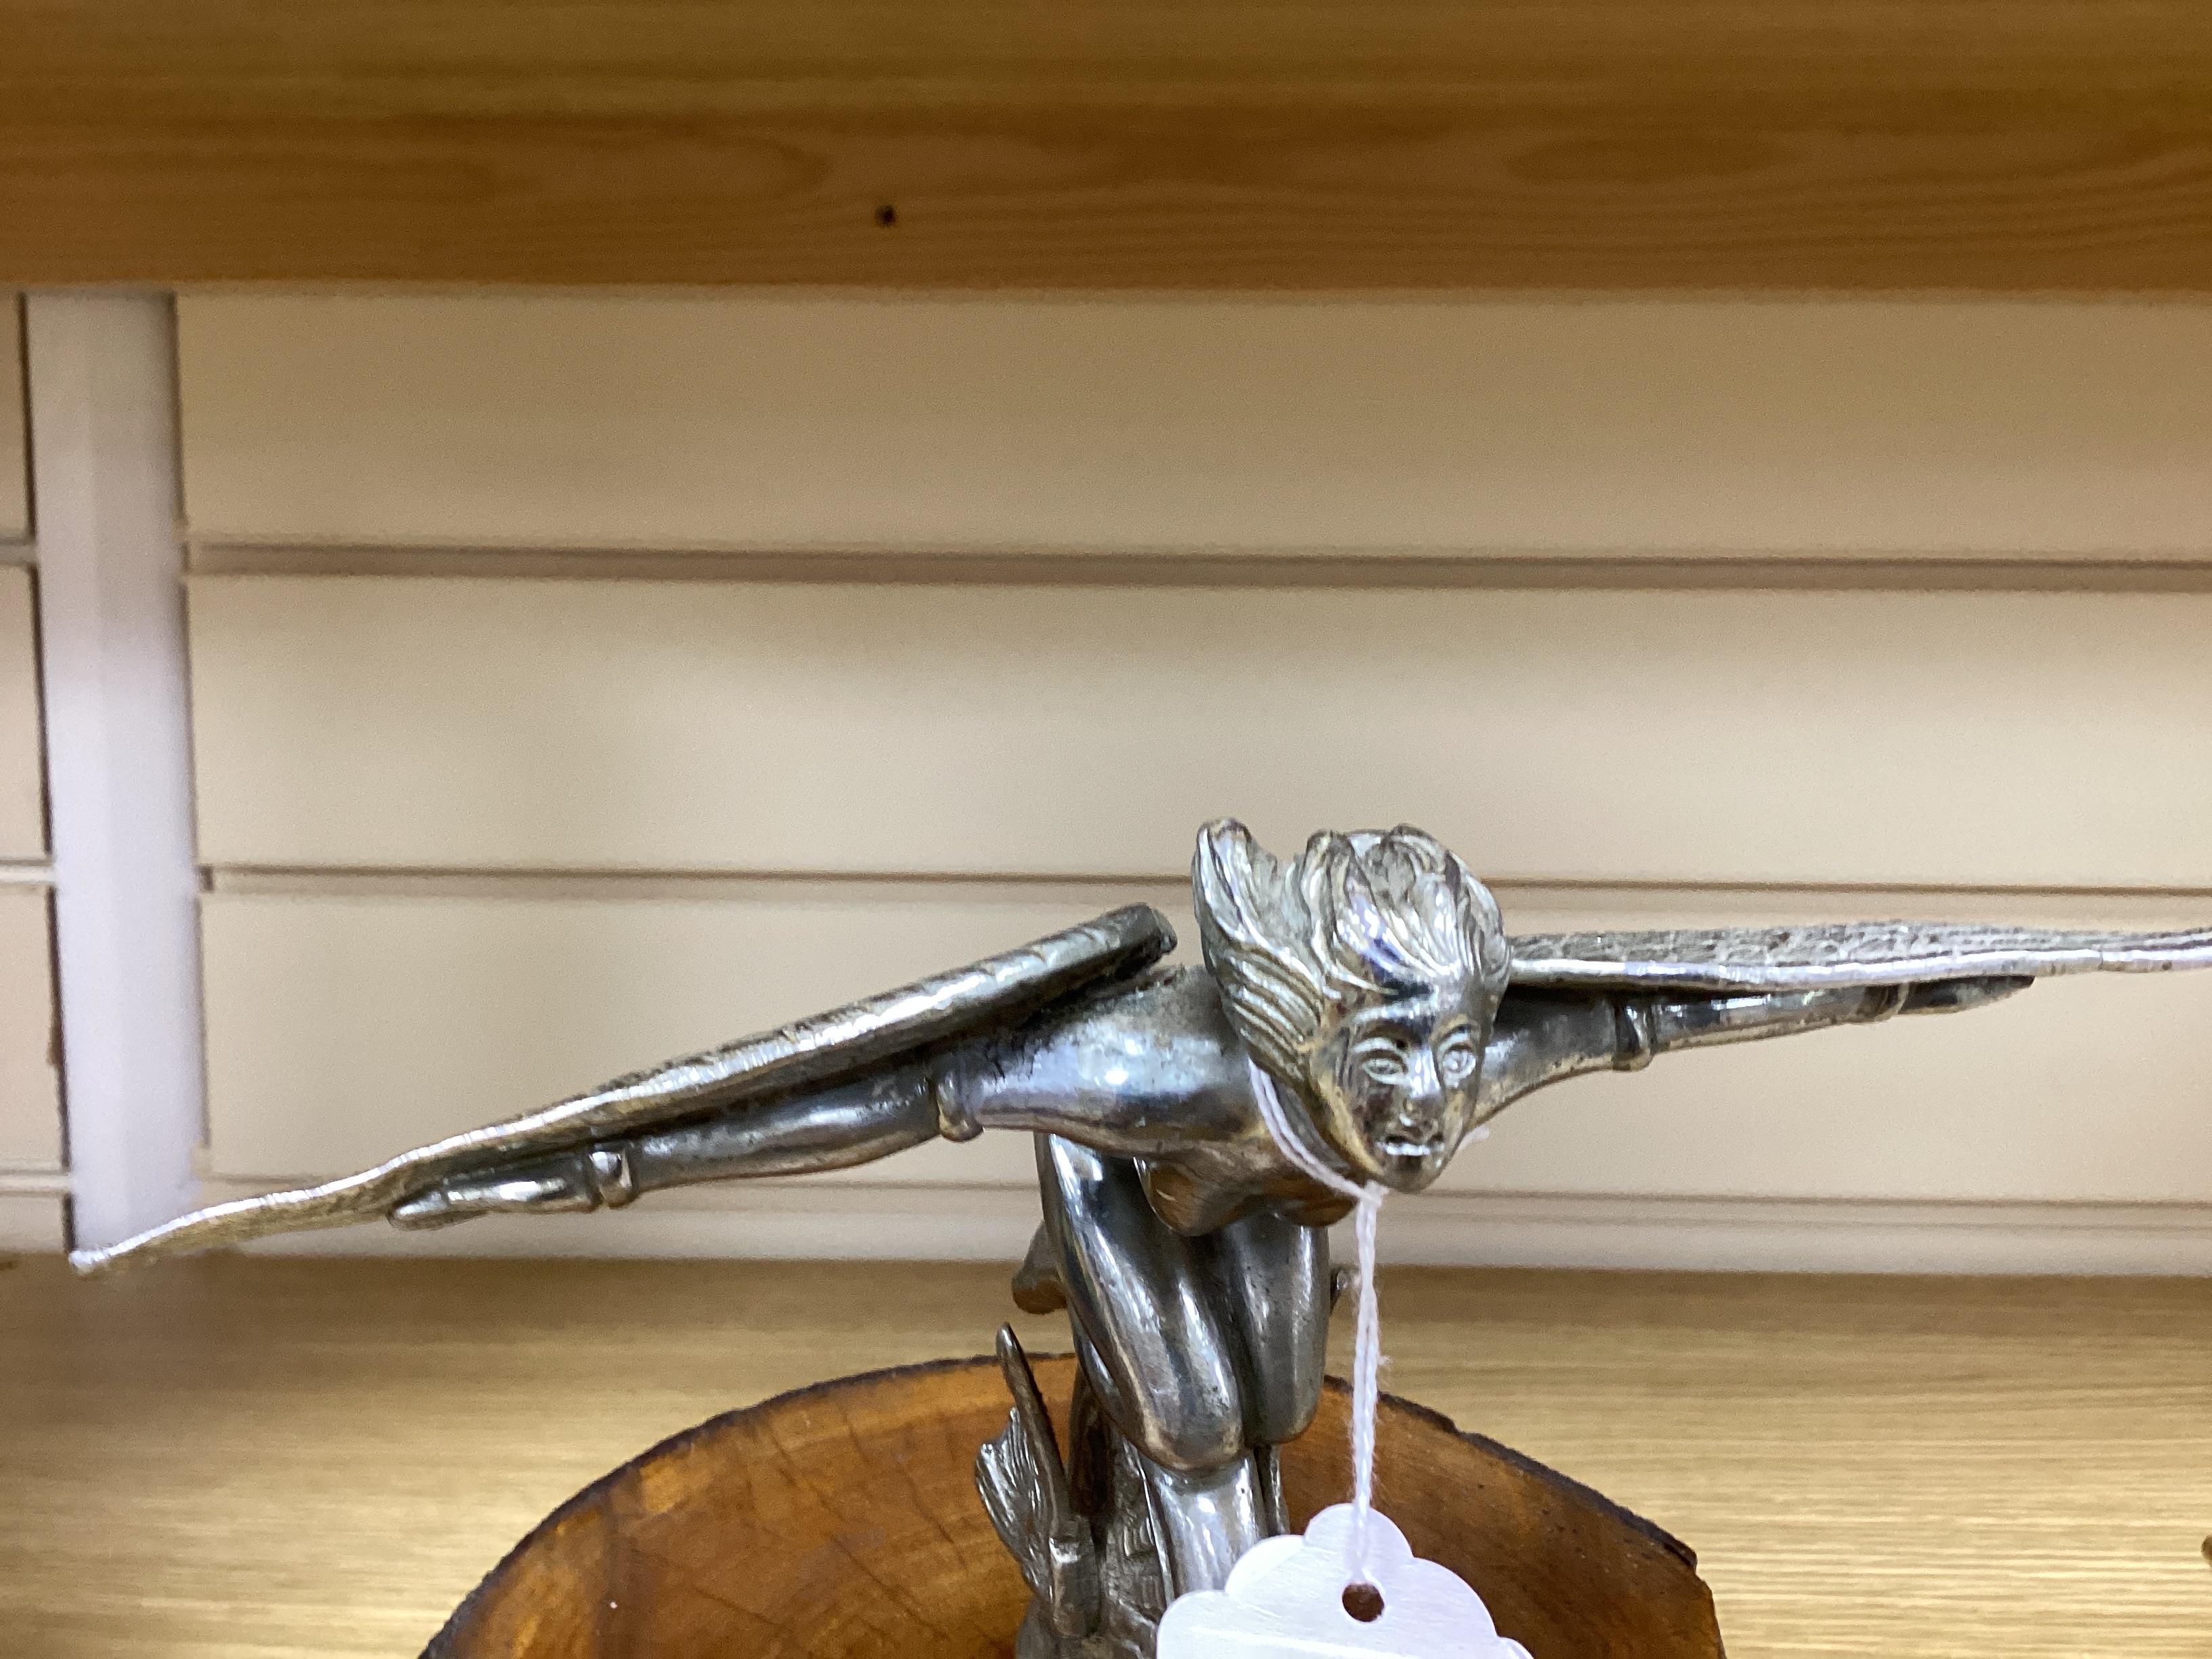 A vintage chrome plated car mascot of a winged female riding a wheel, mounted on a tree trunk cross-section, 19cm high